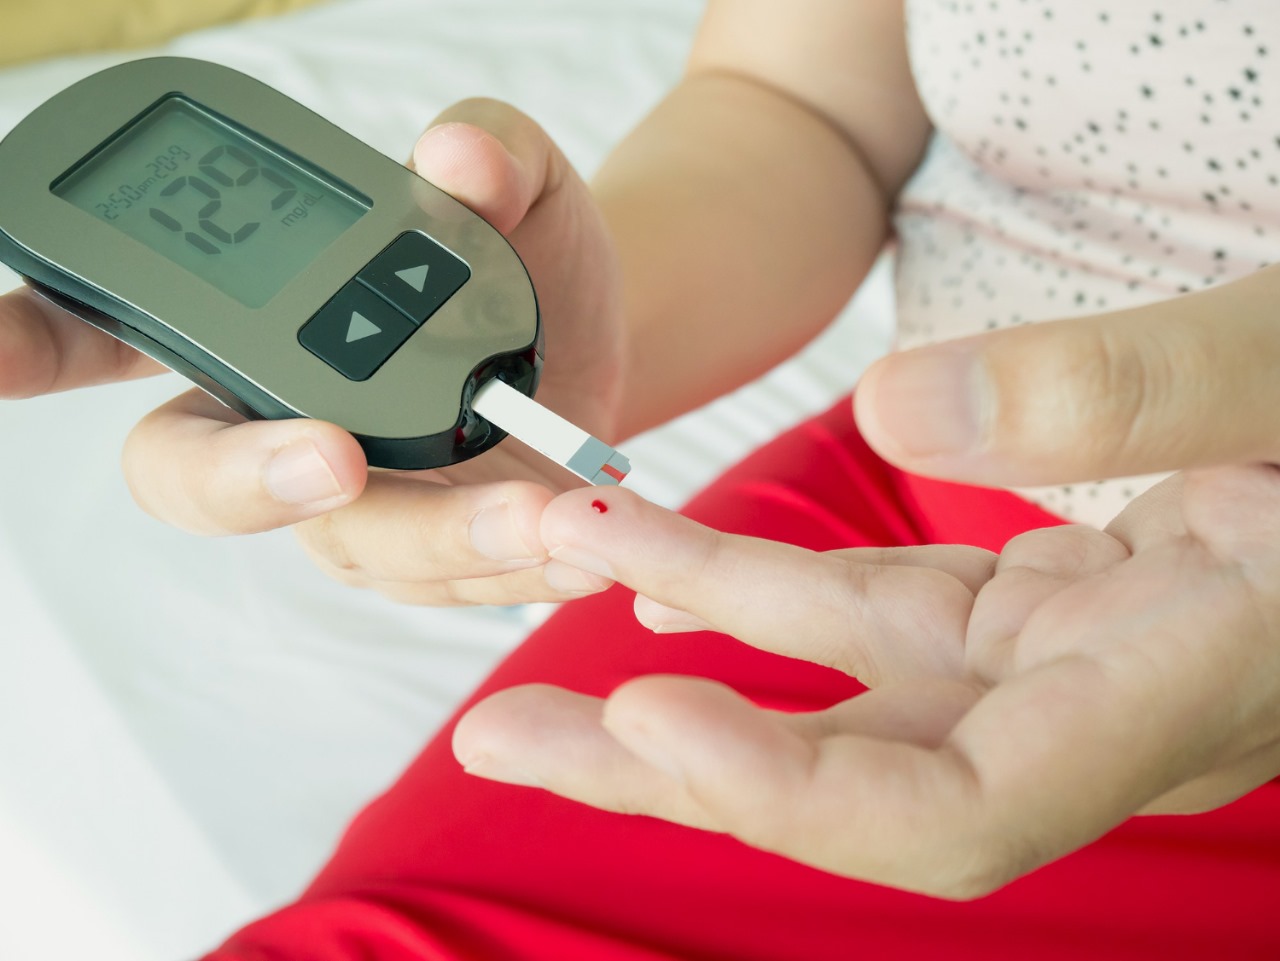 How to maintain healthy blood sugar levels without medication?